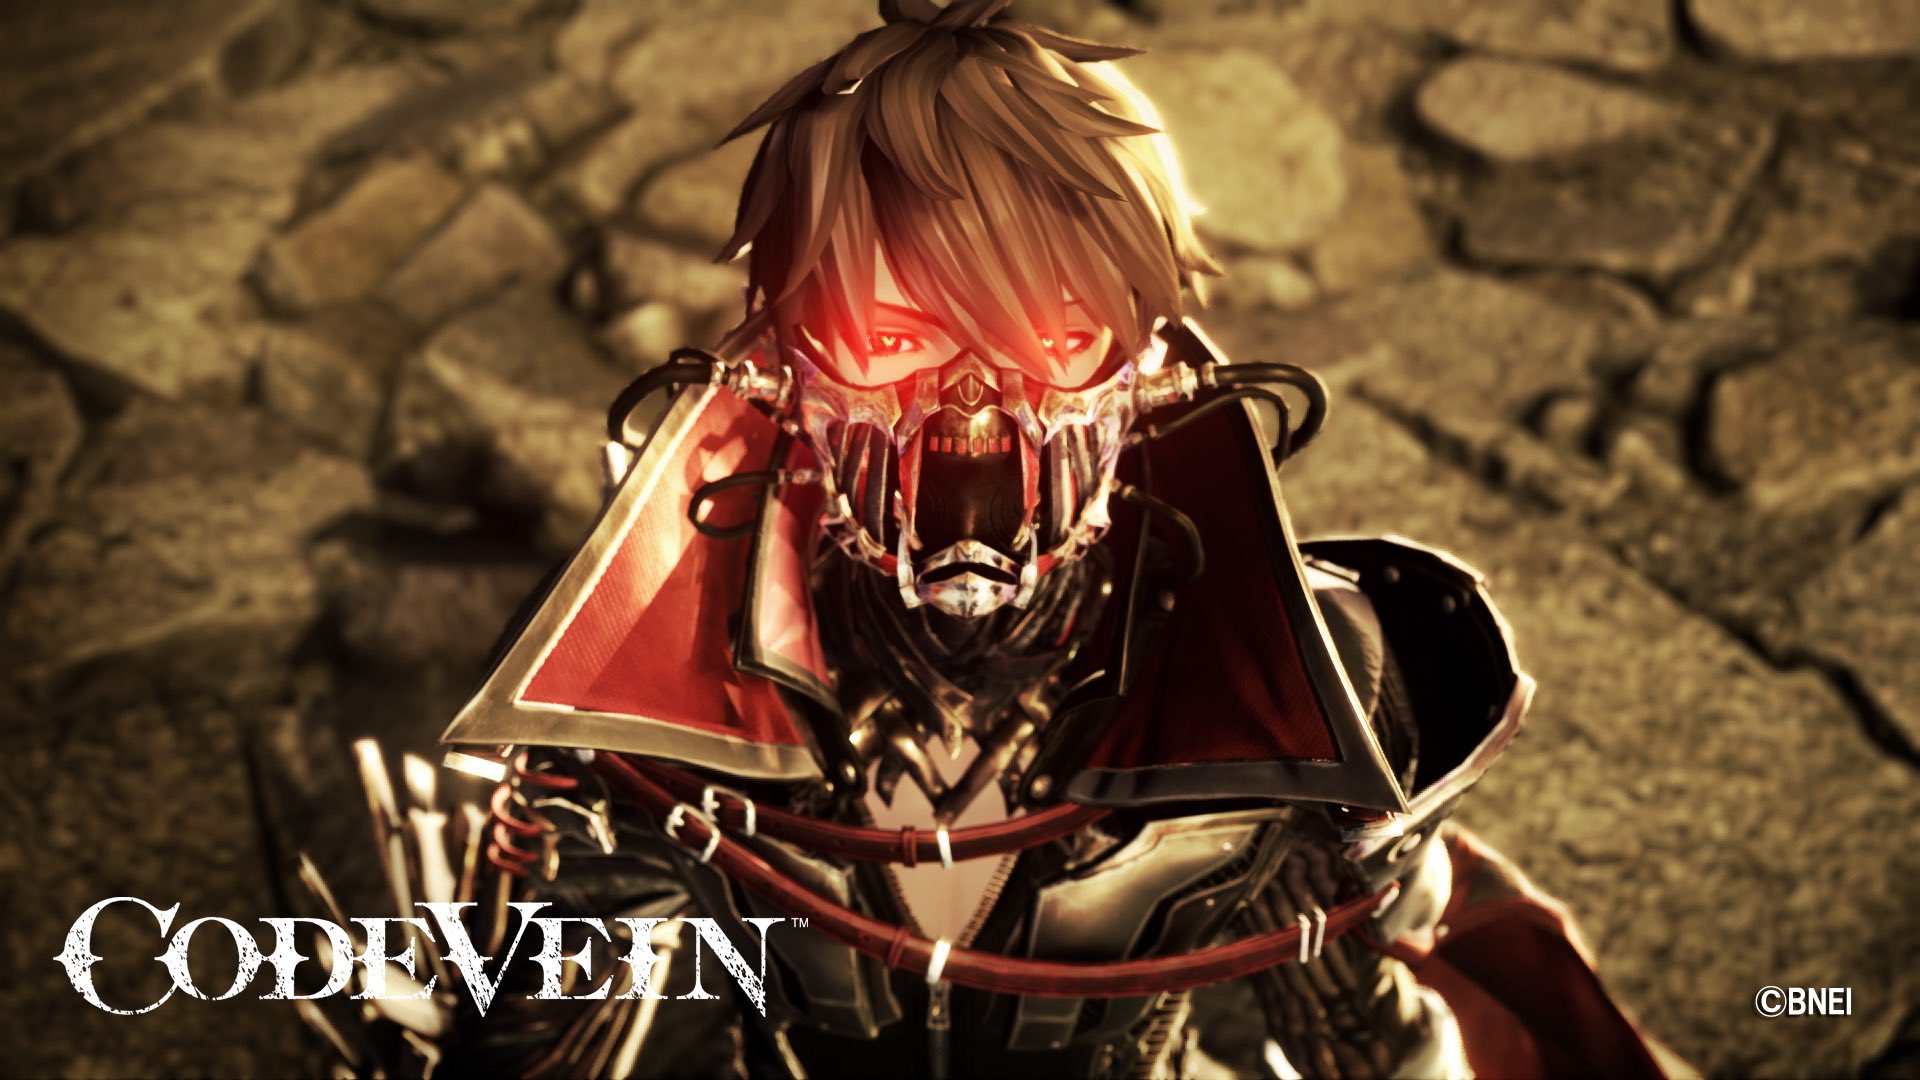 Code Vein Debut Trailer To Be Released May Update